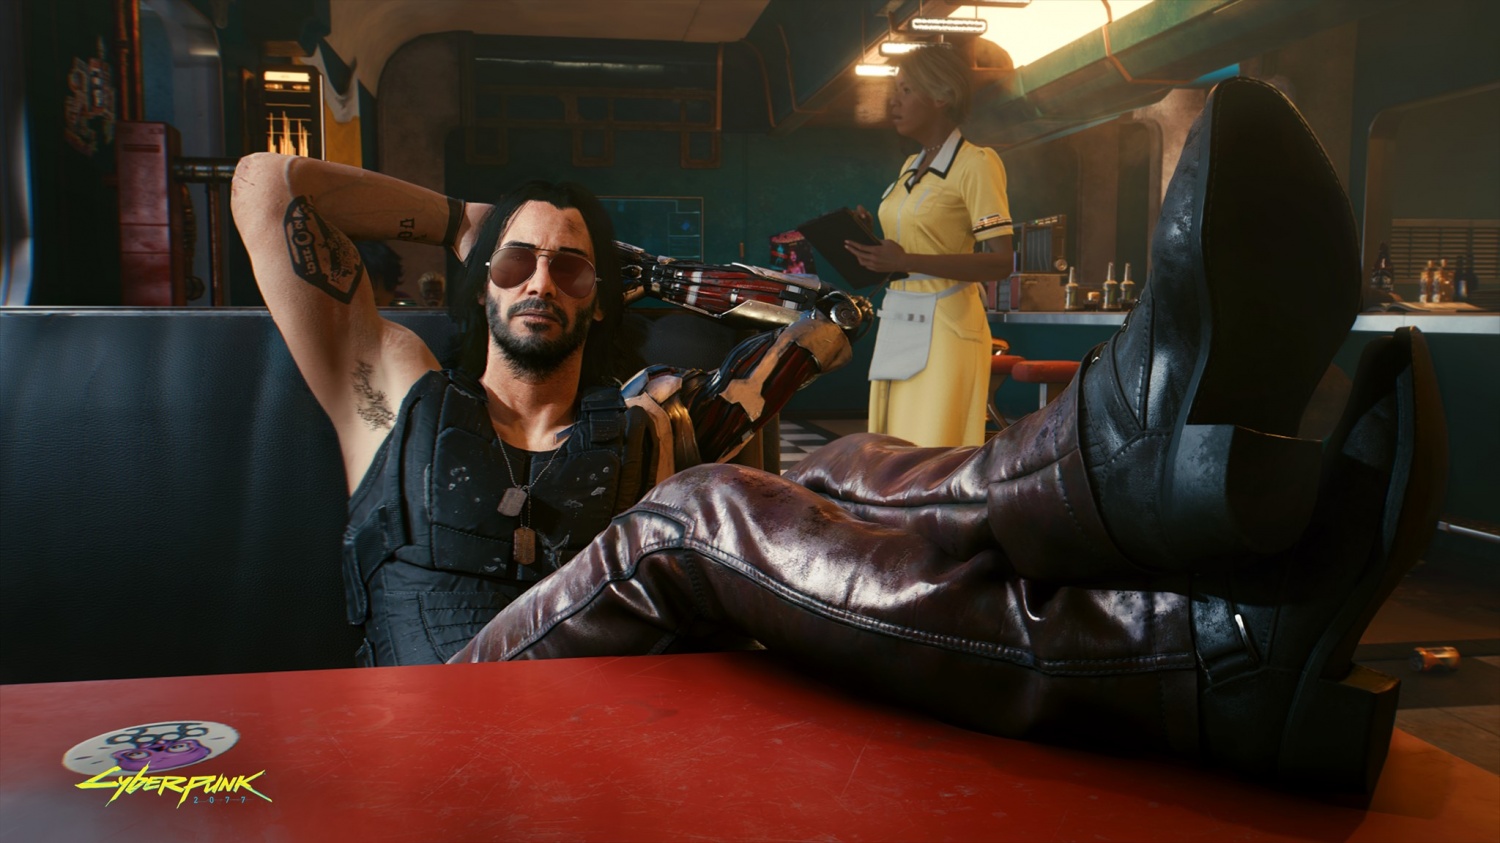 Cyberpunk 2077 Johnny Silverhand with his feet up on a diner table with the waitress standing behind him